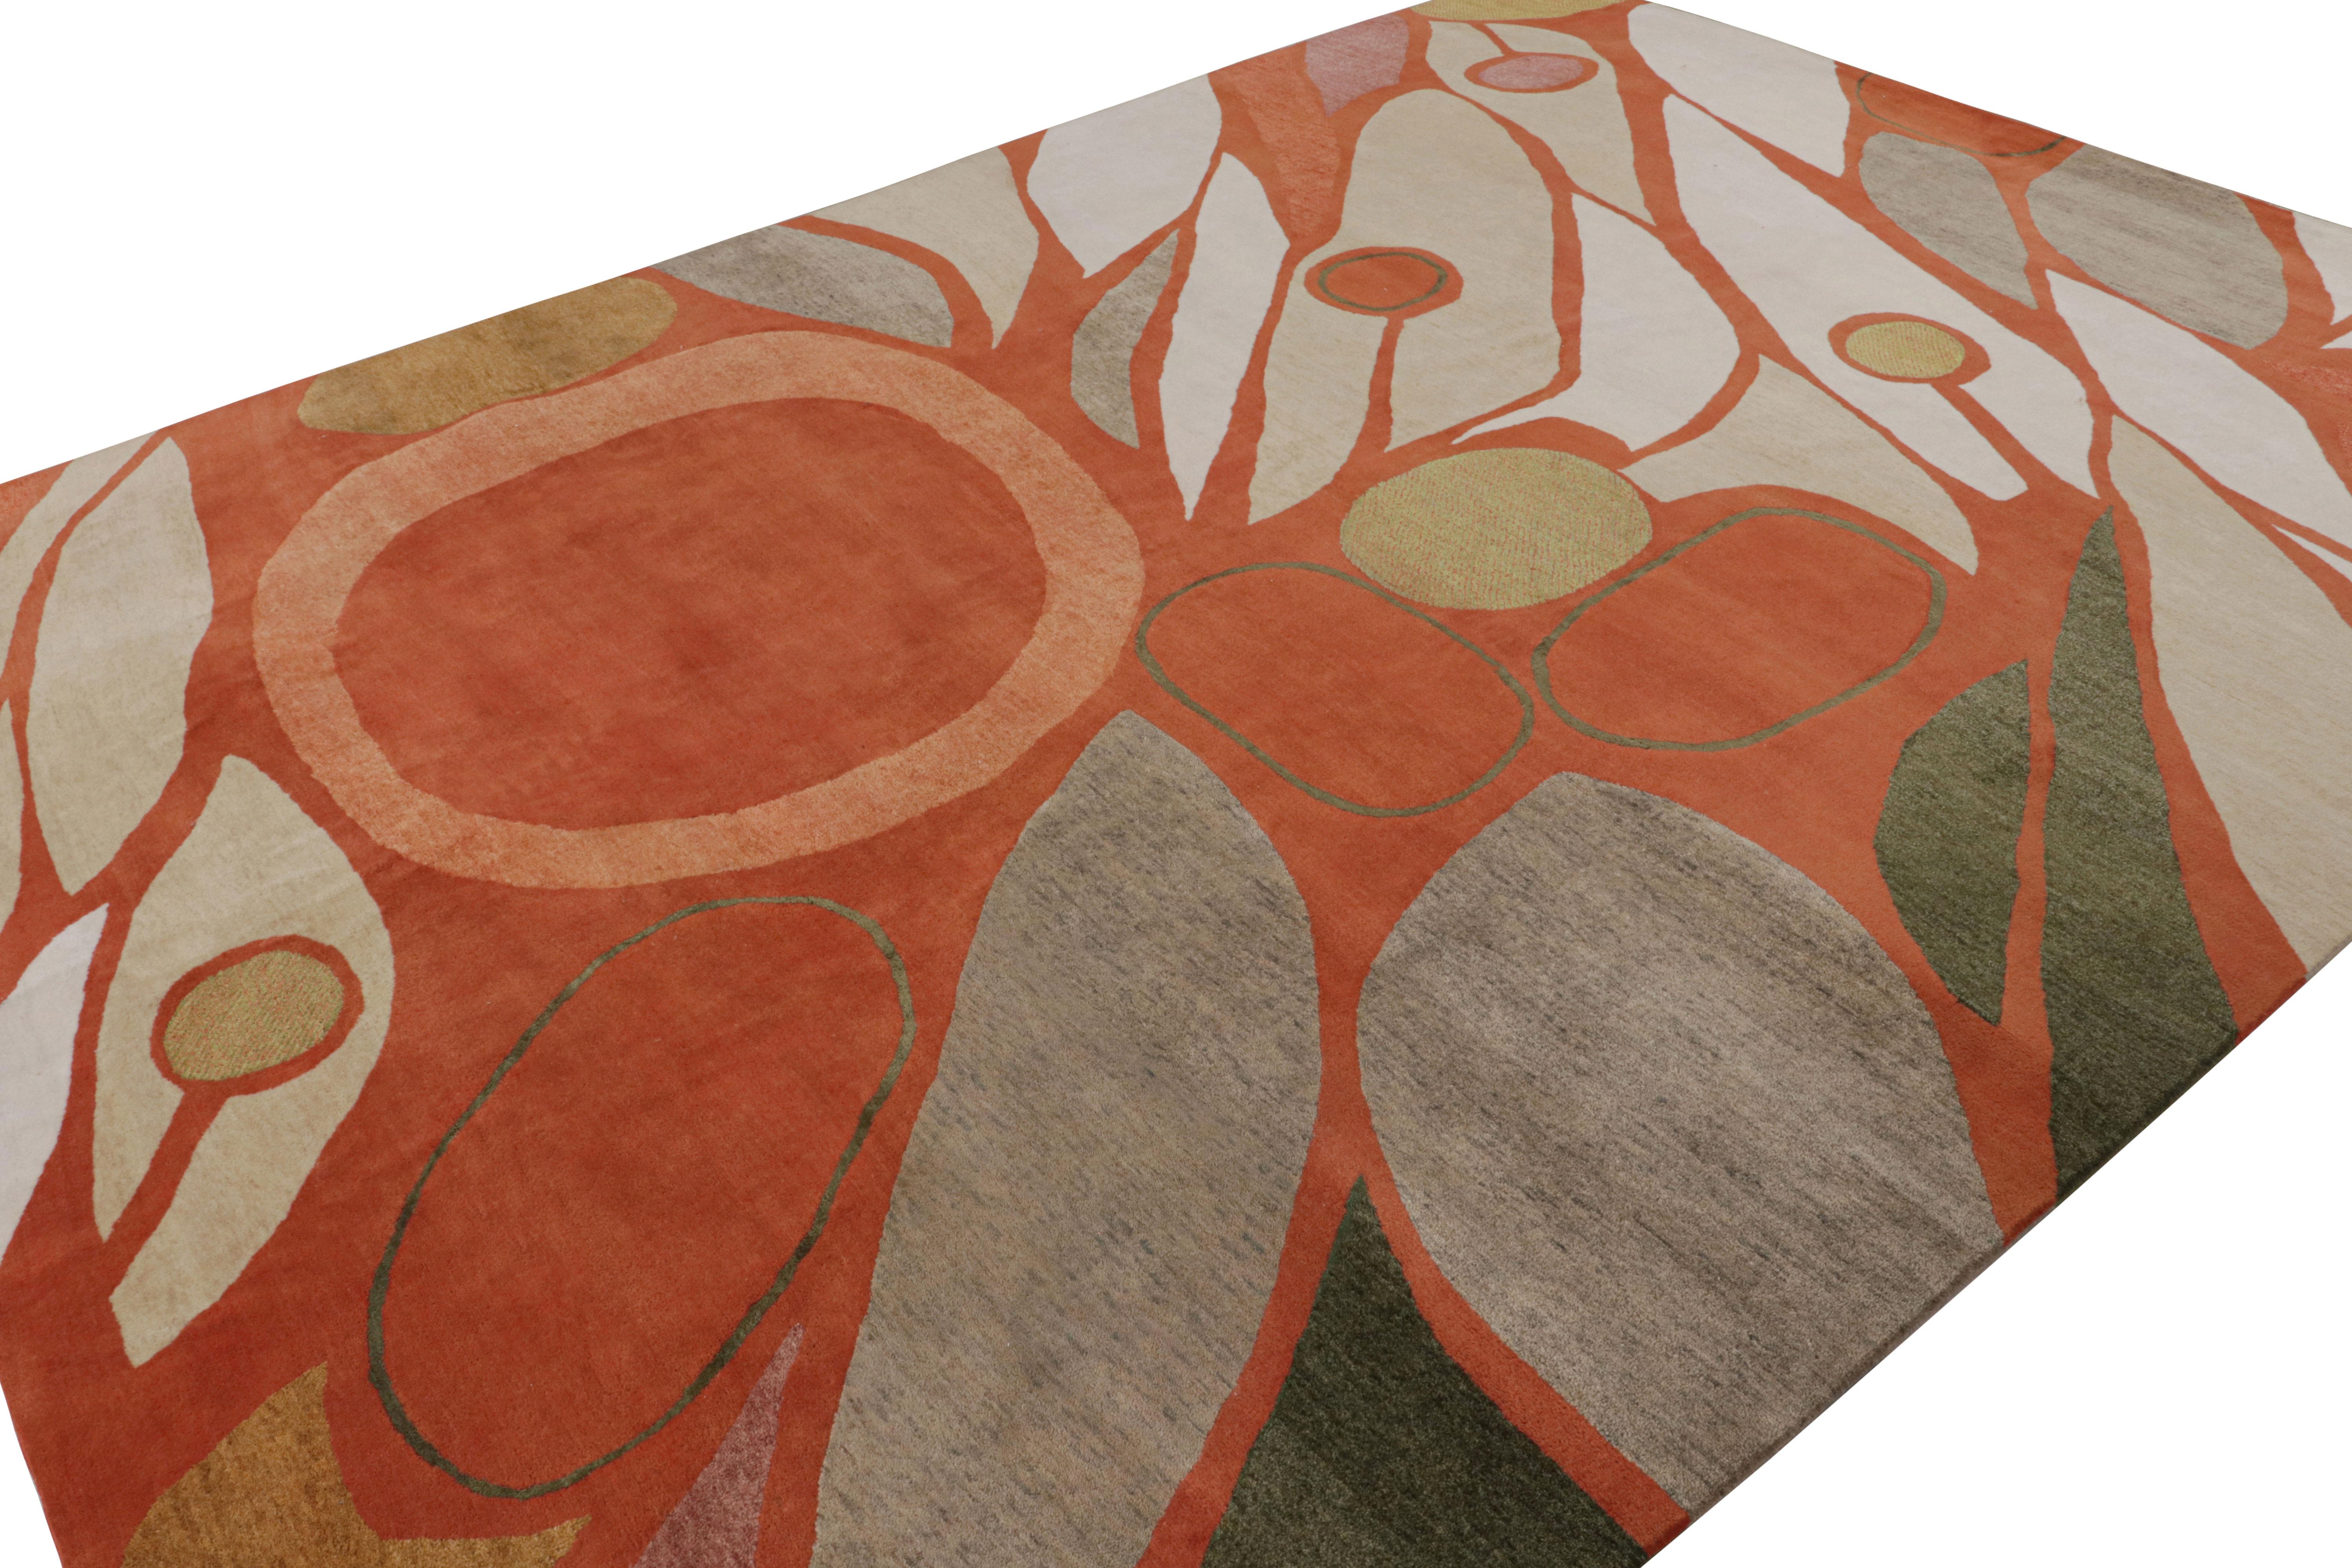 This hand-knotted wool and silk 9x12 modern rug represents an exclusive design from Rug & Kilim’s Mid-Century Modern rug collection. A collaboration with contemporary artist Jenn Ski, this piece is inspired by 1950s styles never-before represented